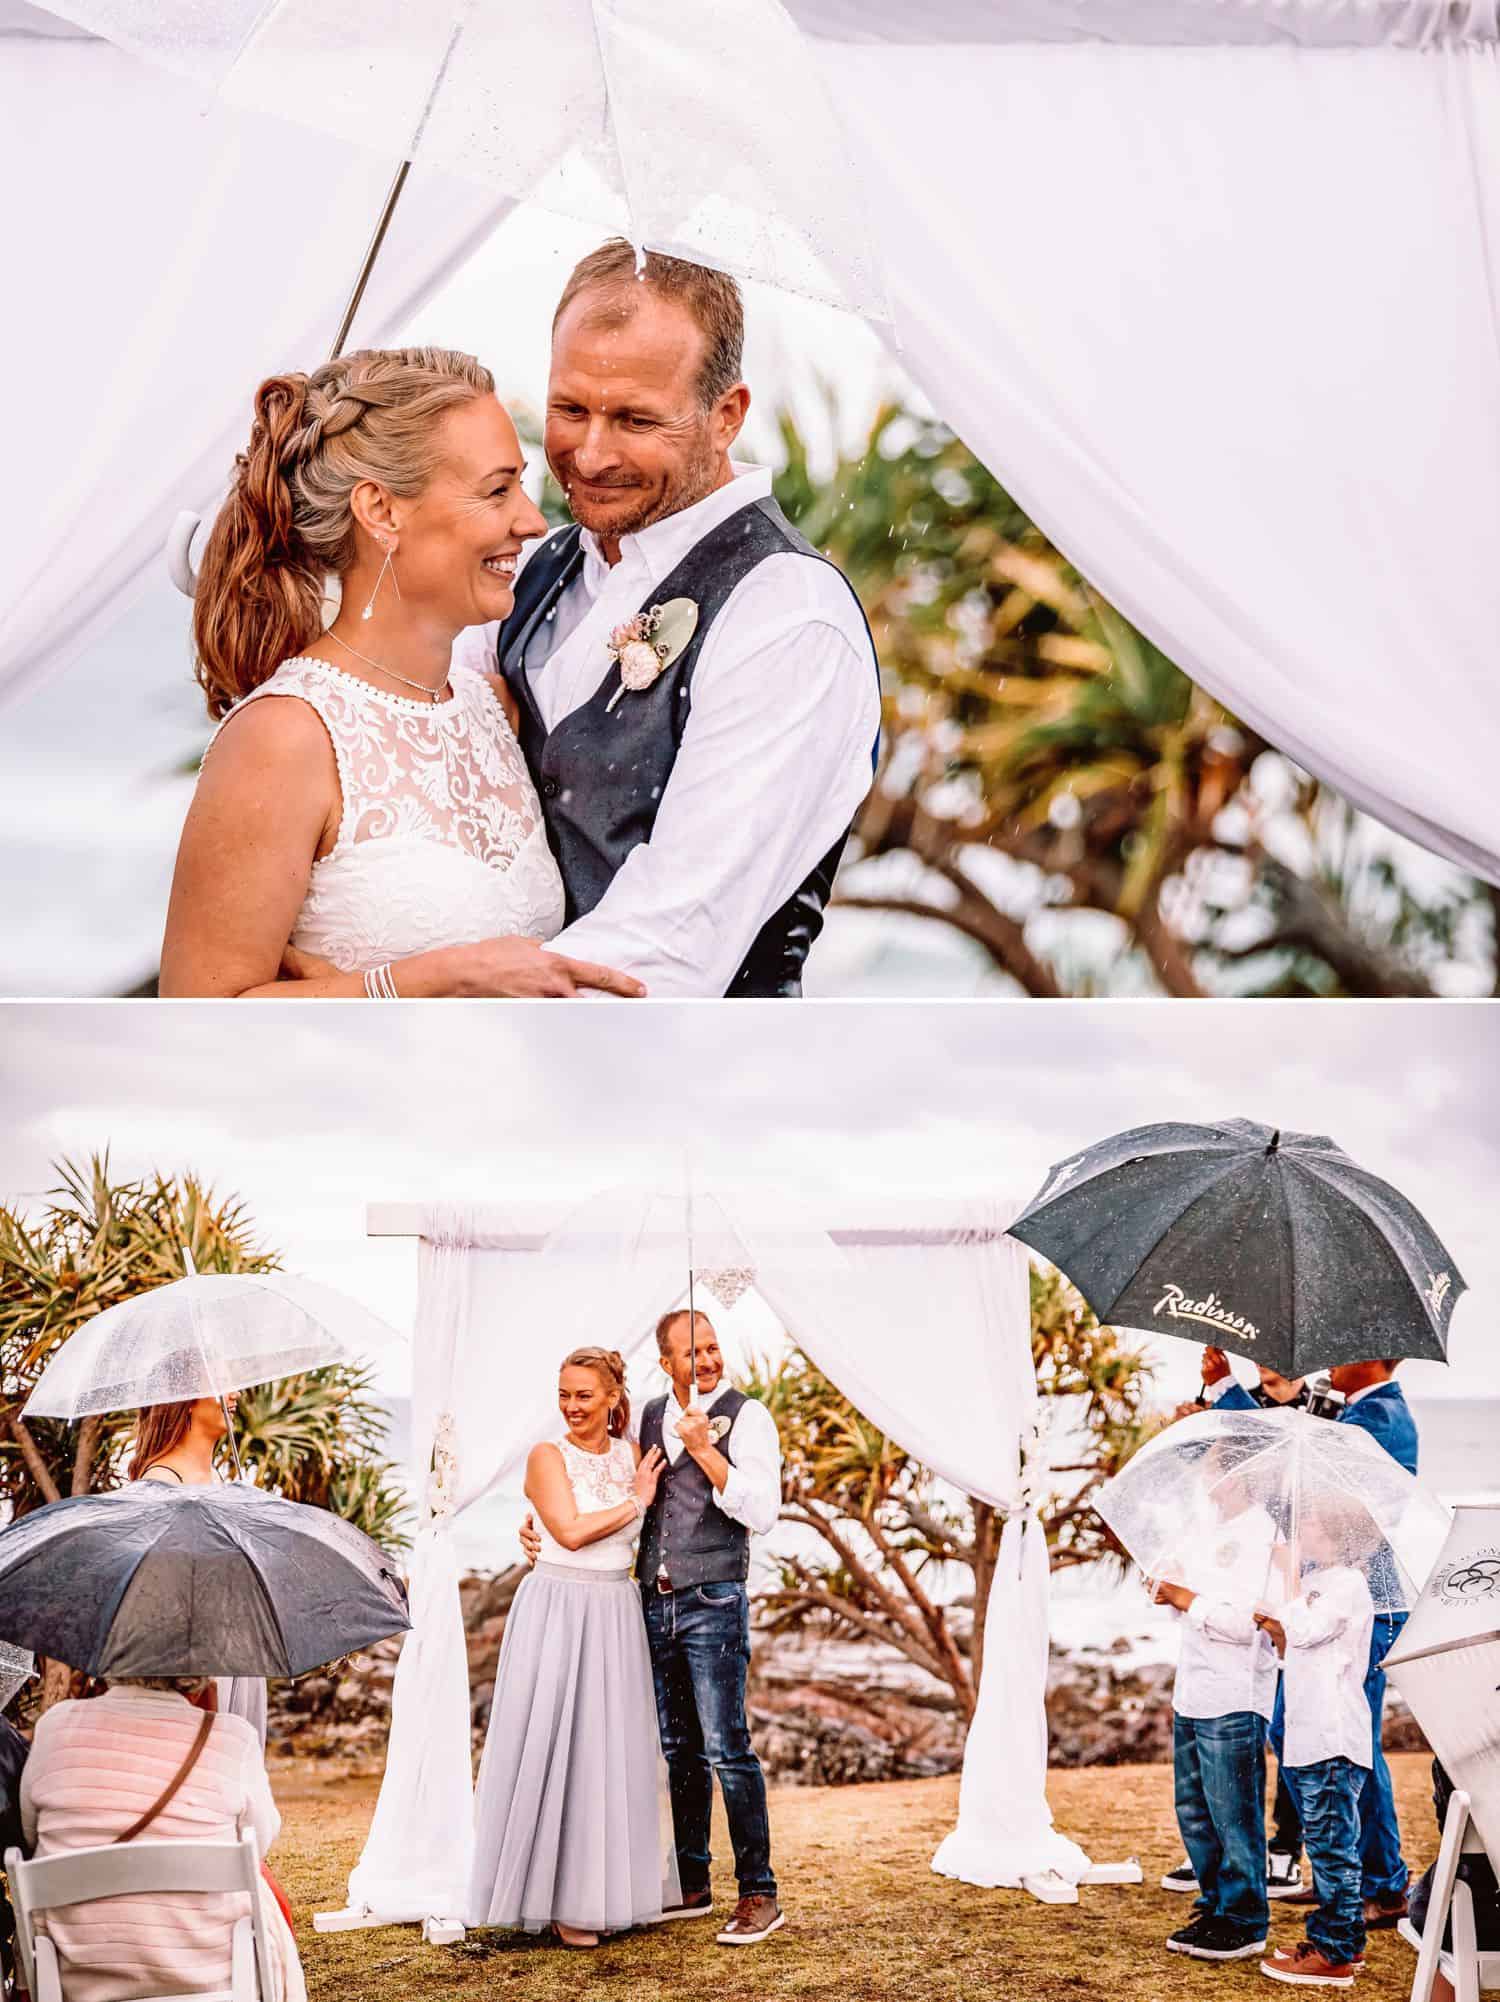 Bride and groom in the rain in front of curtained archway with a clear plastic umbrella held over them. Bride and groom in the rain in front of a curtained archway surrounded by guests with umbrellas.